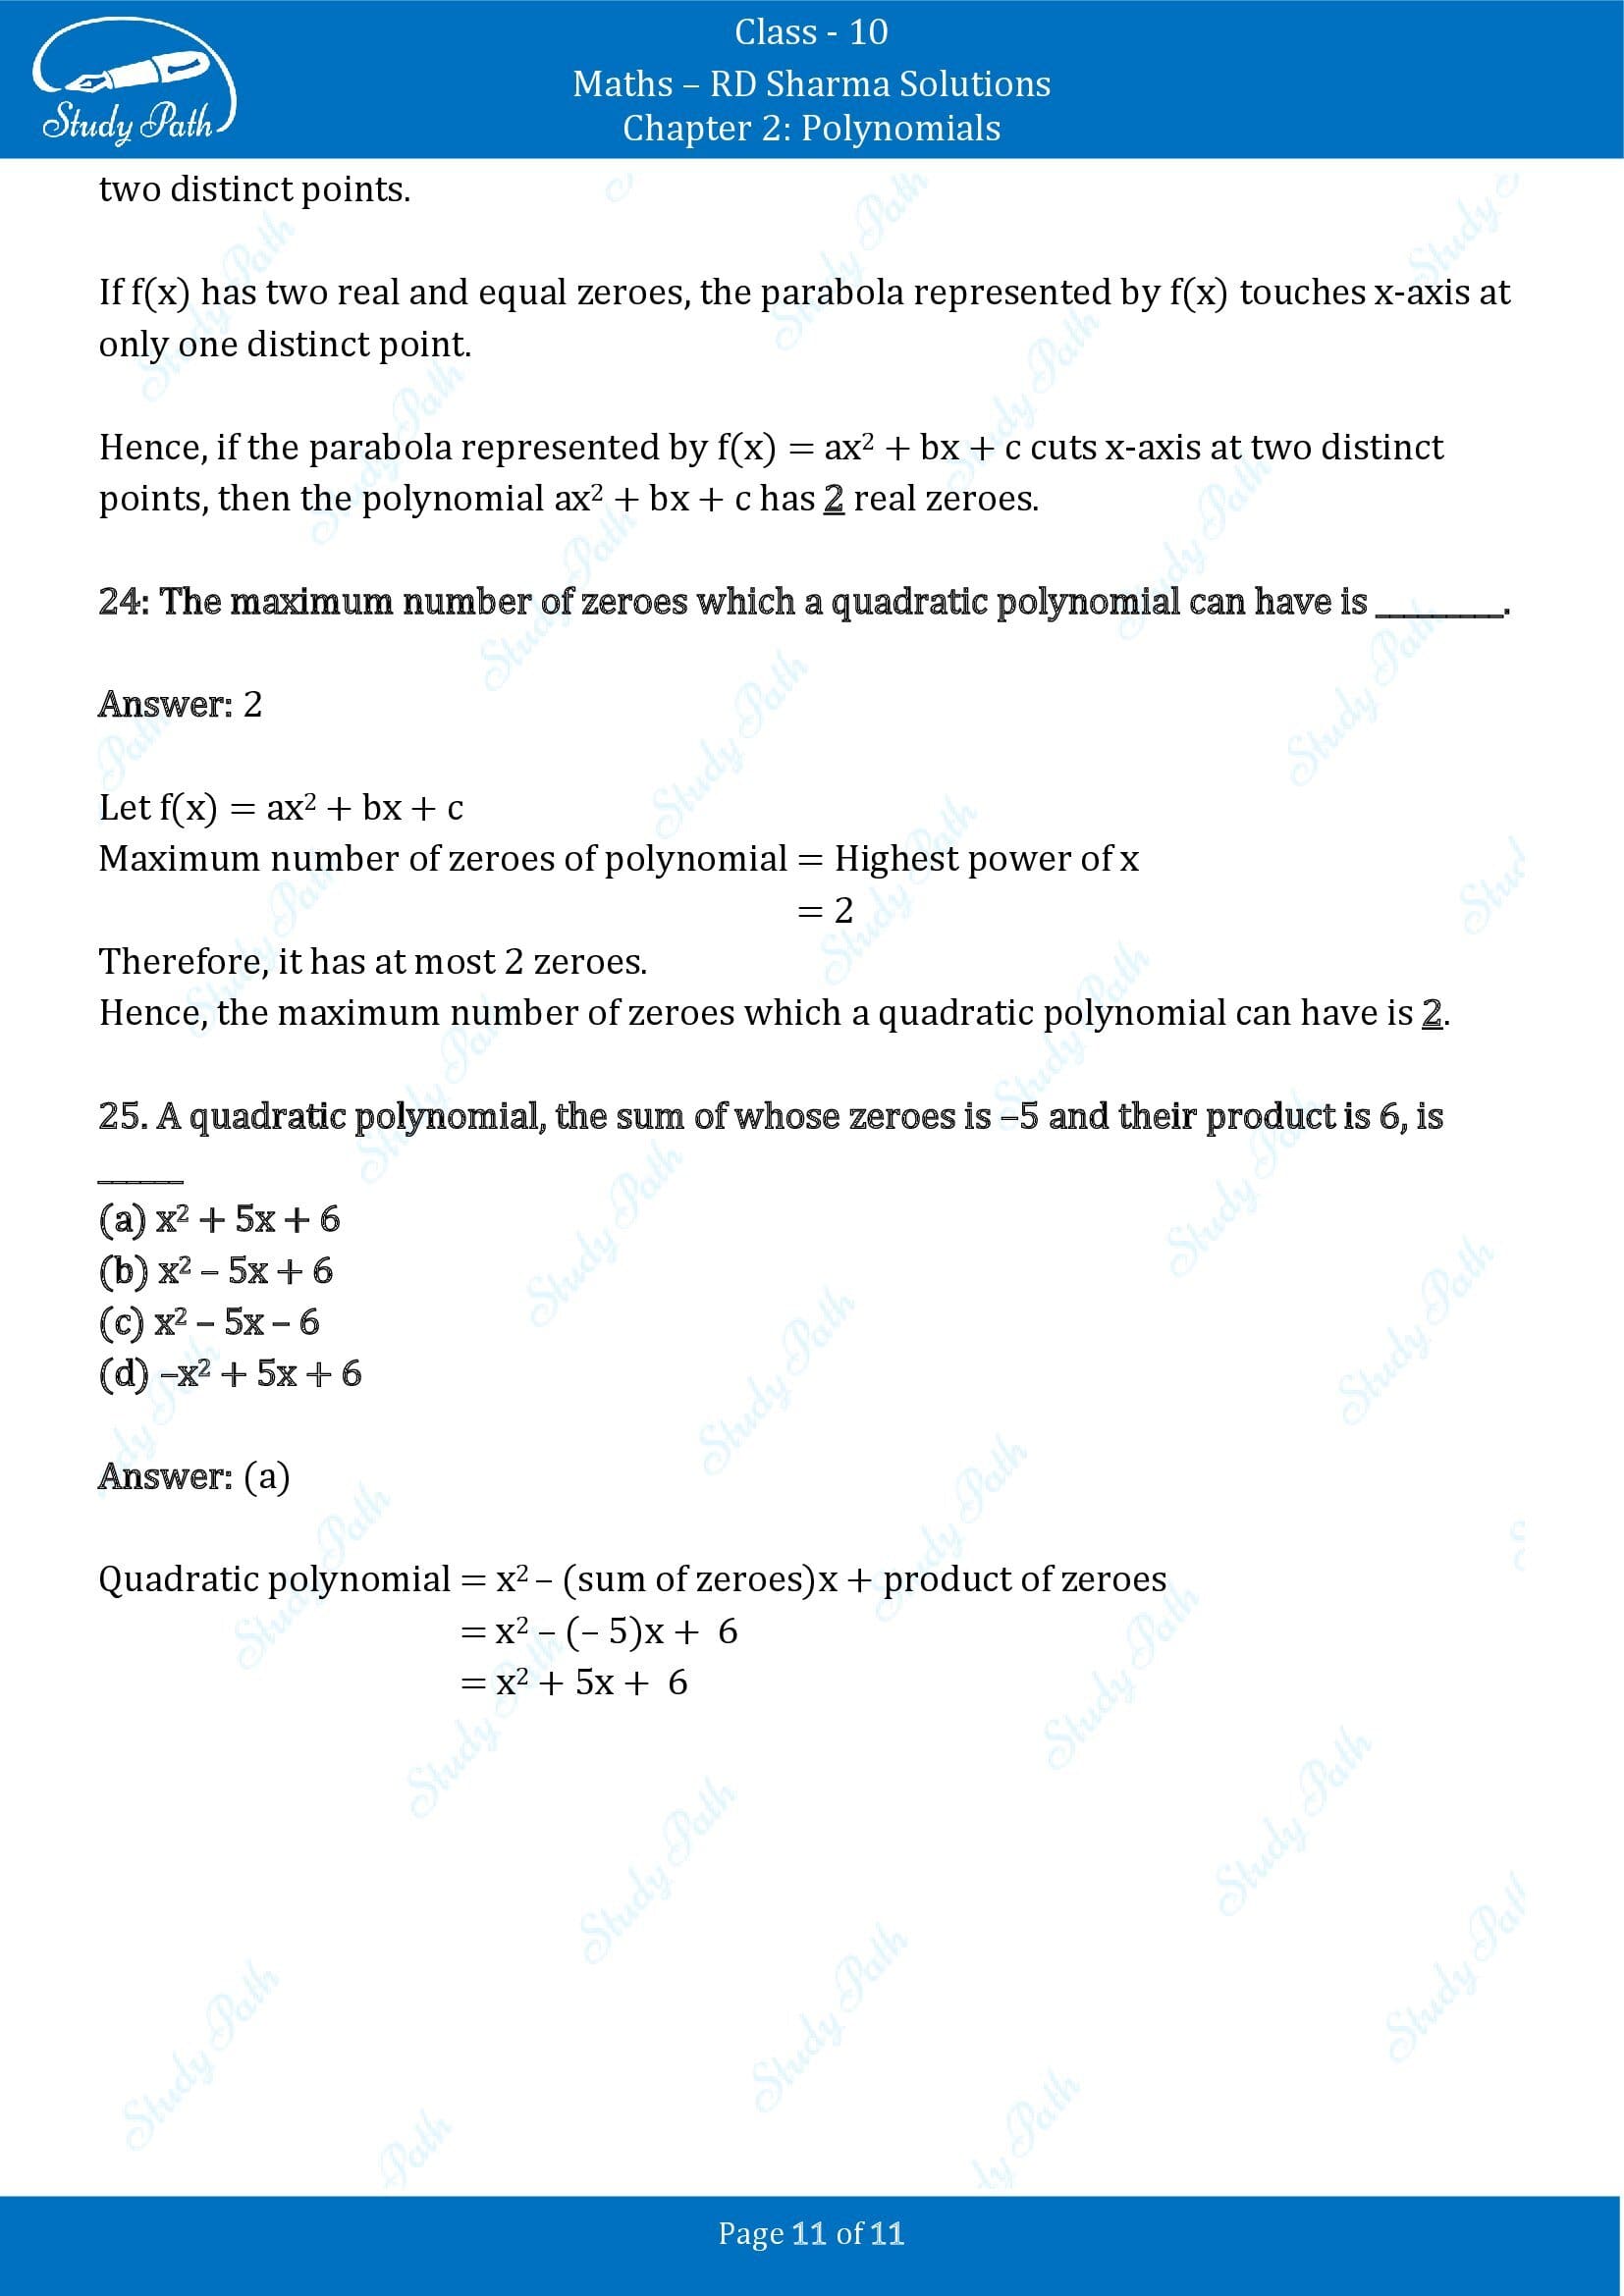 RD Sharma Solutions Class 10 Chapter 2 Polynomials Fill in the Blank Type Questions FBQs 00011